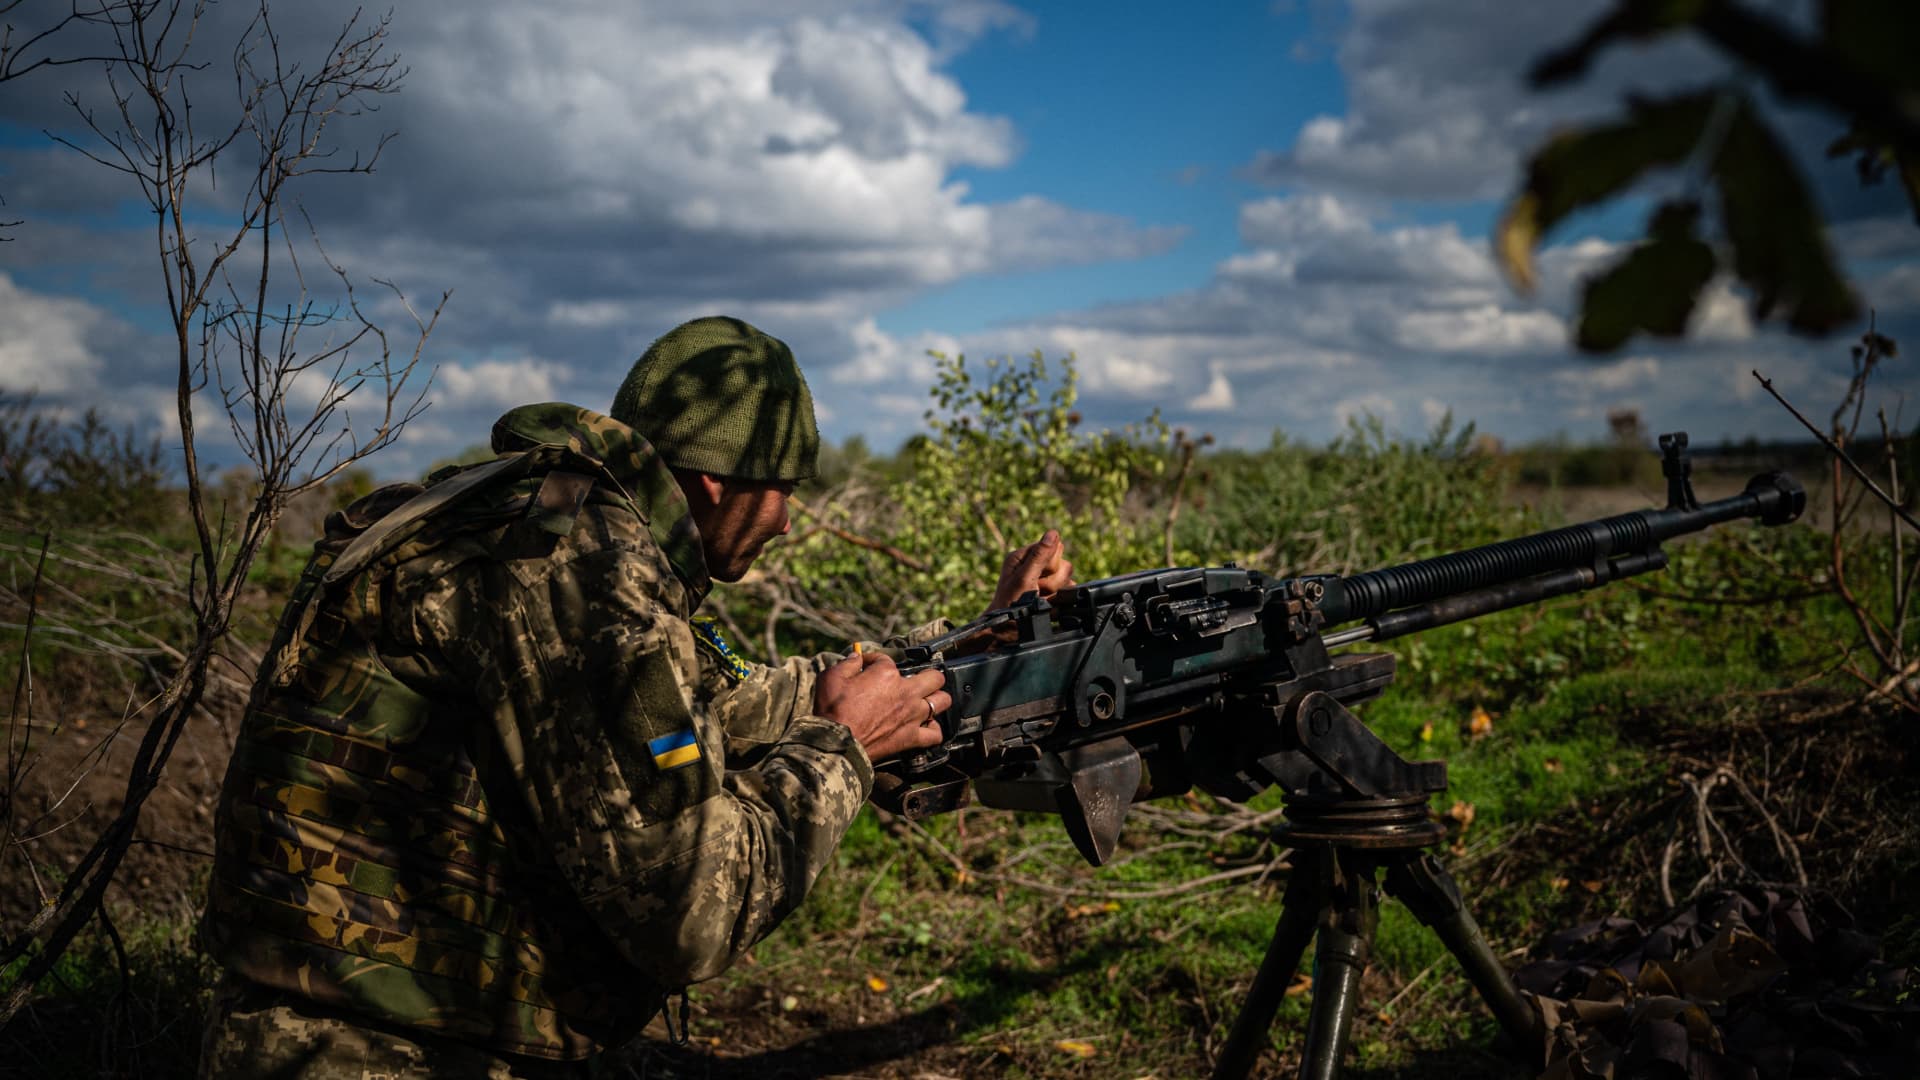 Ukrainian soldier Viktor, 35, checks his heavy machine gun at a position along the front line in the Mykolaiv region on October 5, 2022, amid the Russian invasion of Ukraine.